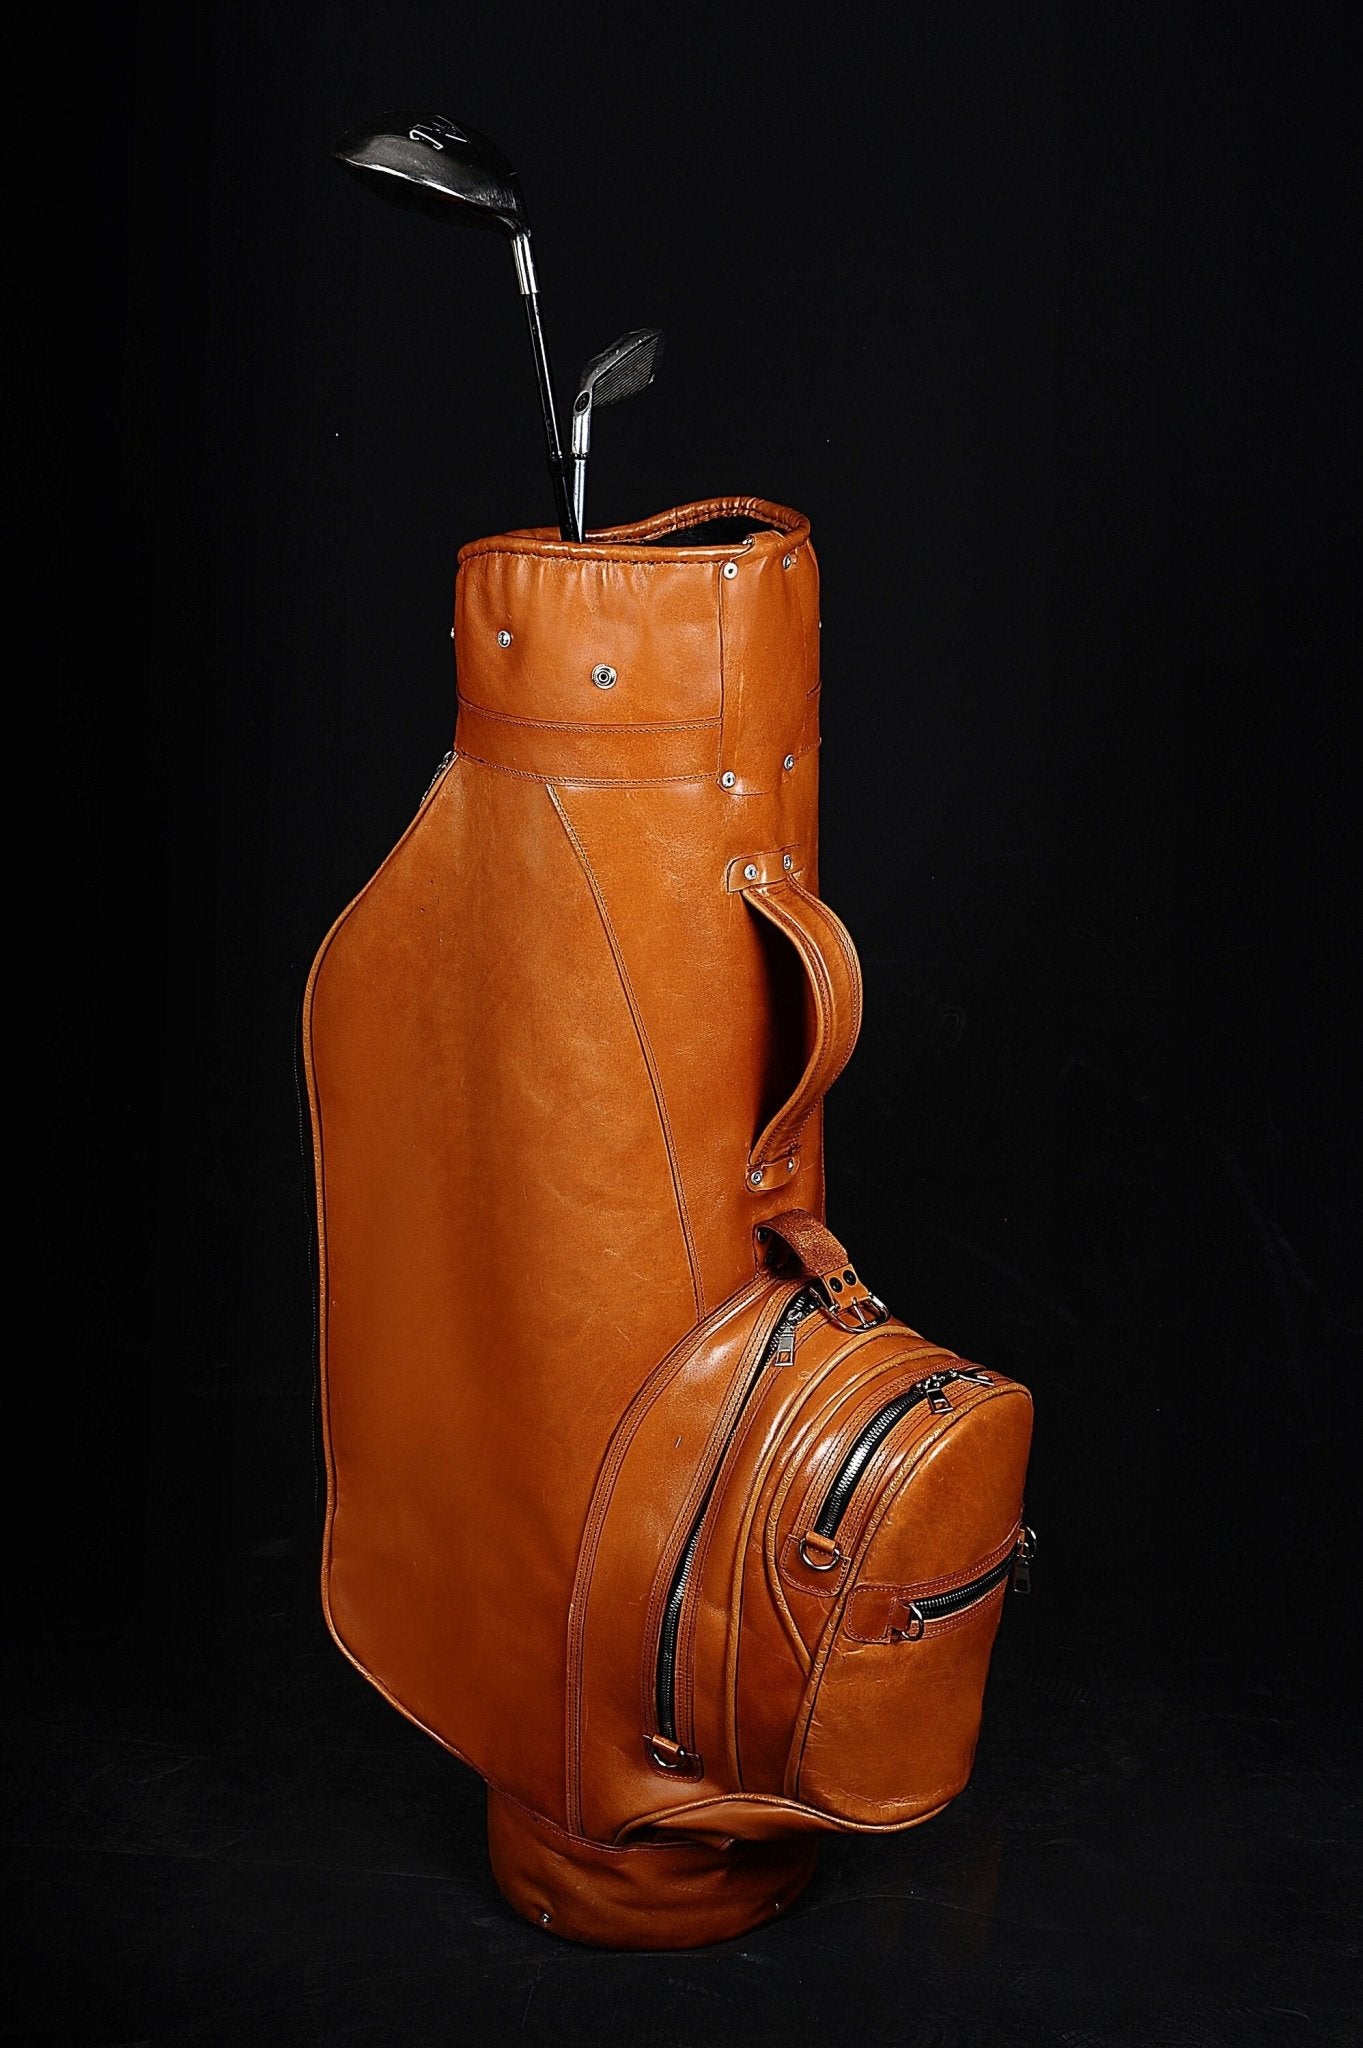 Limited | Tan Color | Handmade Leather Golf Bag | Tailor Made | Leather Golf Stand Bag | Leather Golf Bags | Personalization  99percenthandmade   